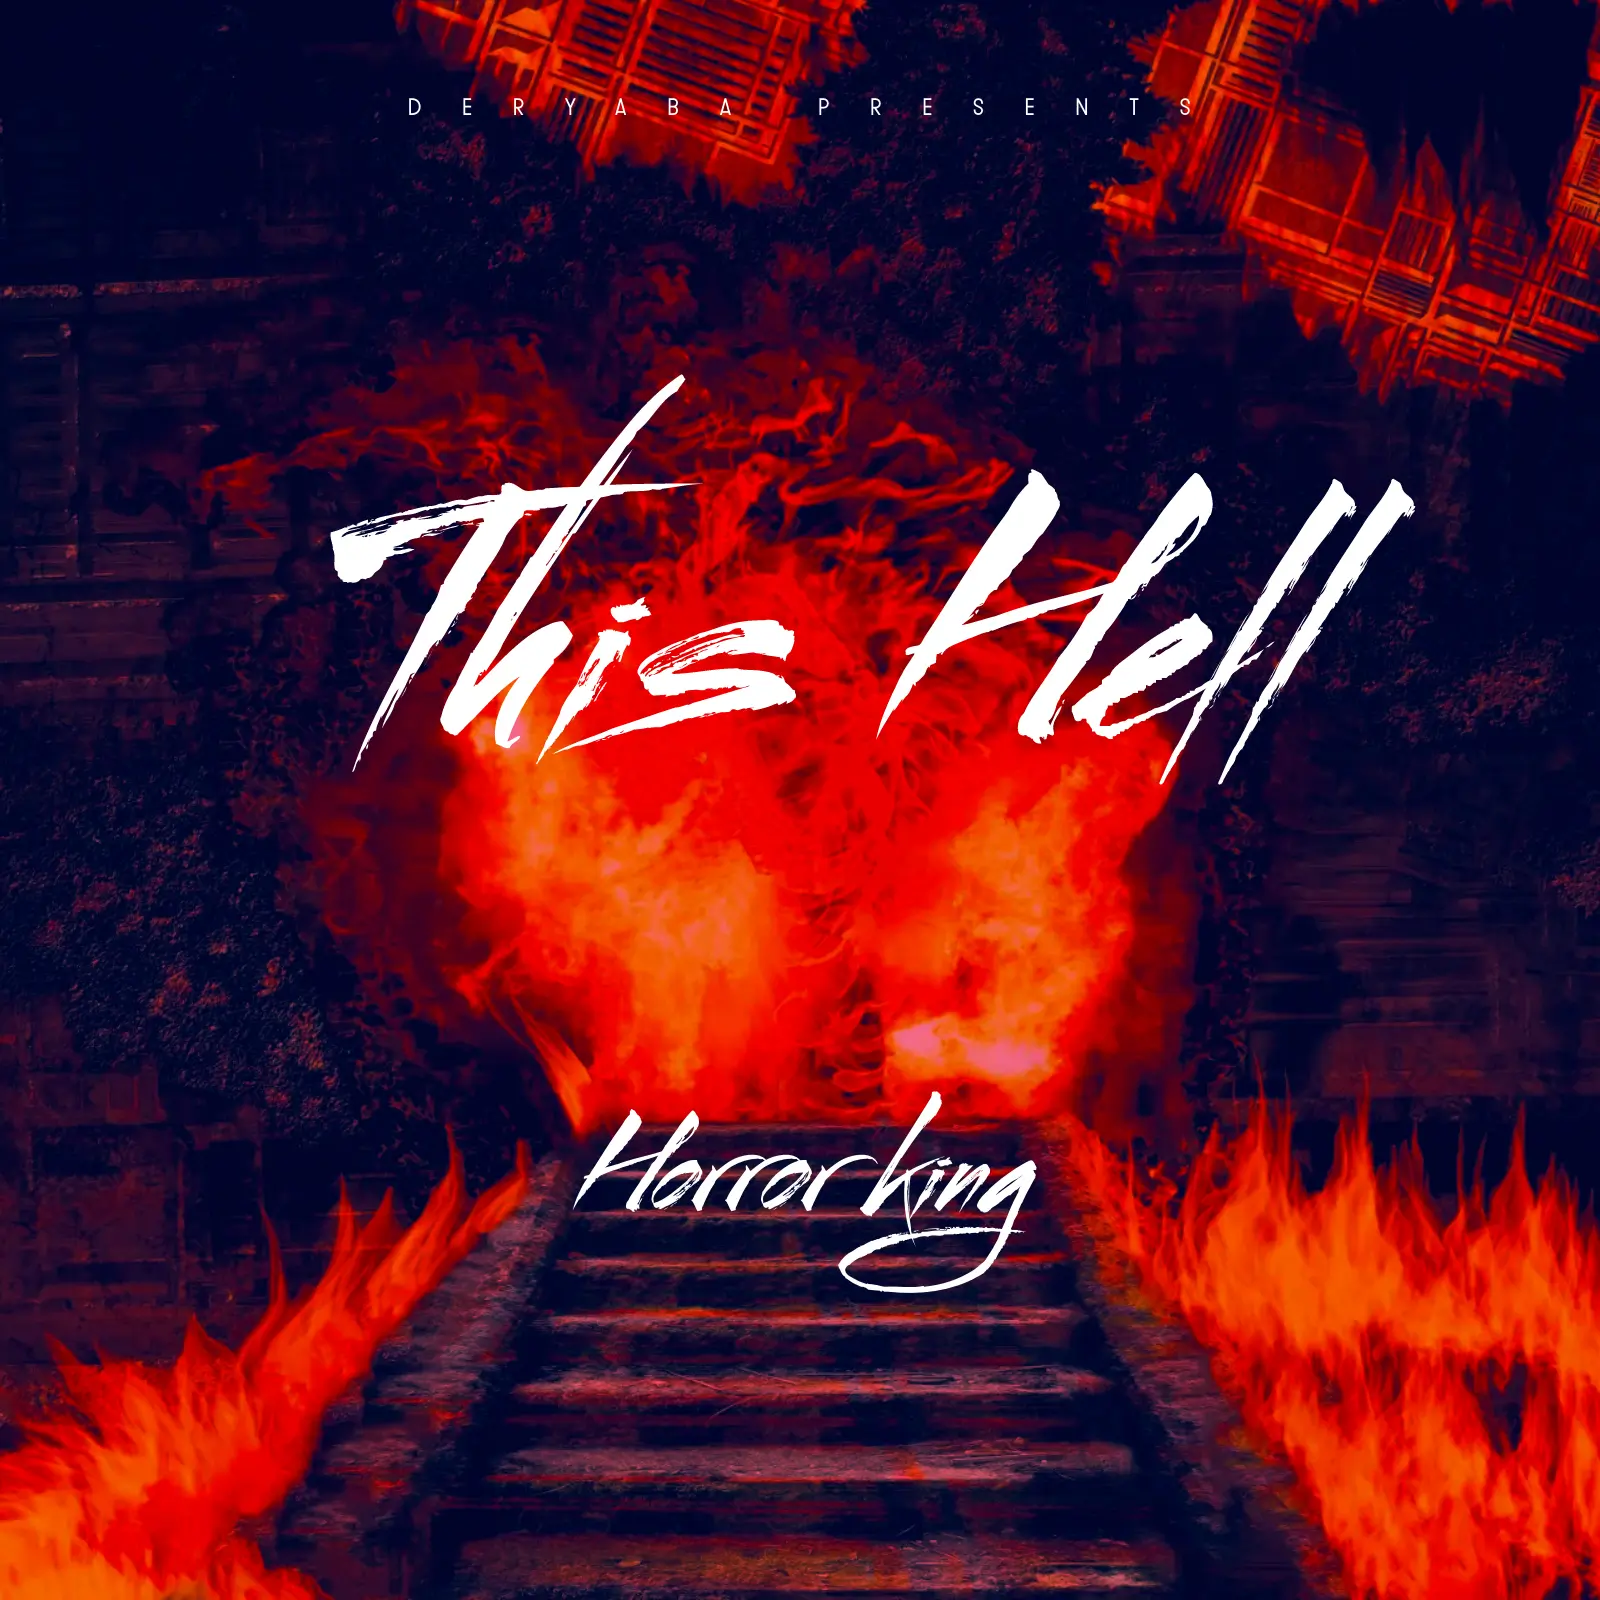 Horror King – This Hell